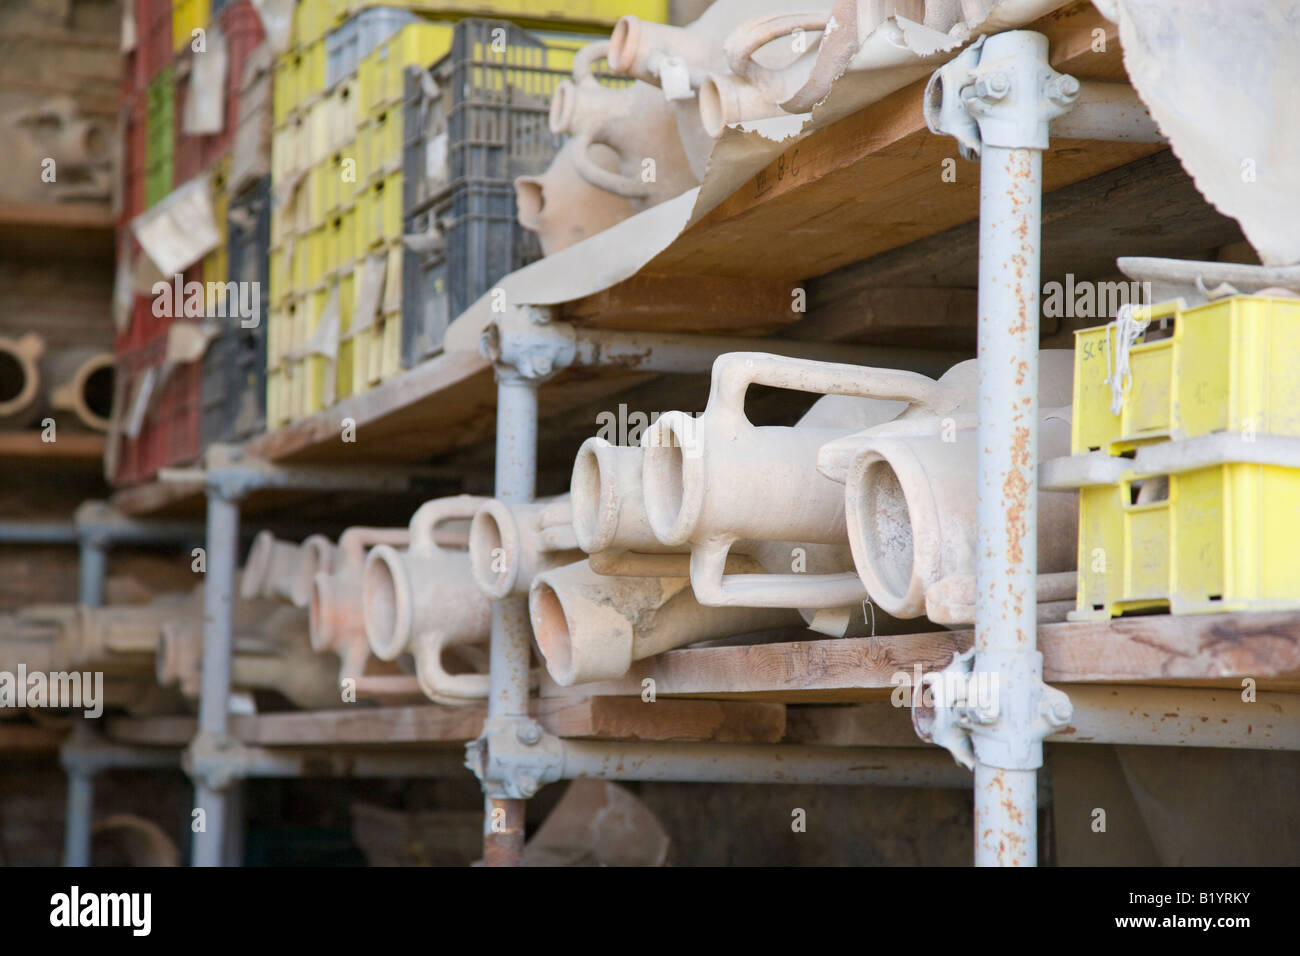 Amphora and other archeological material in the Forum Granary Pompeii Campani Italy Stock Photo